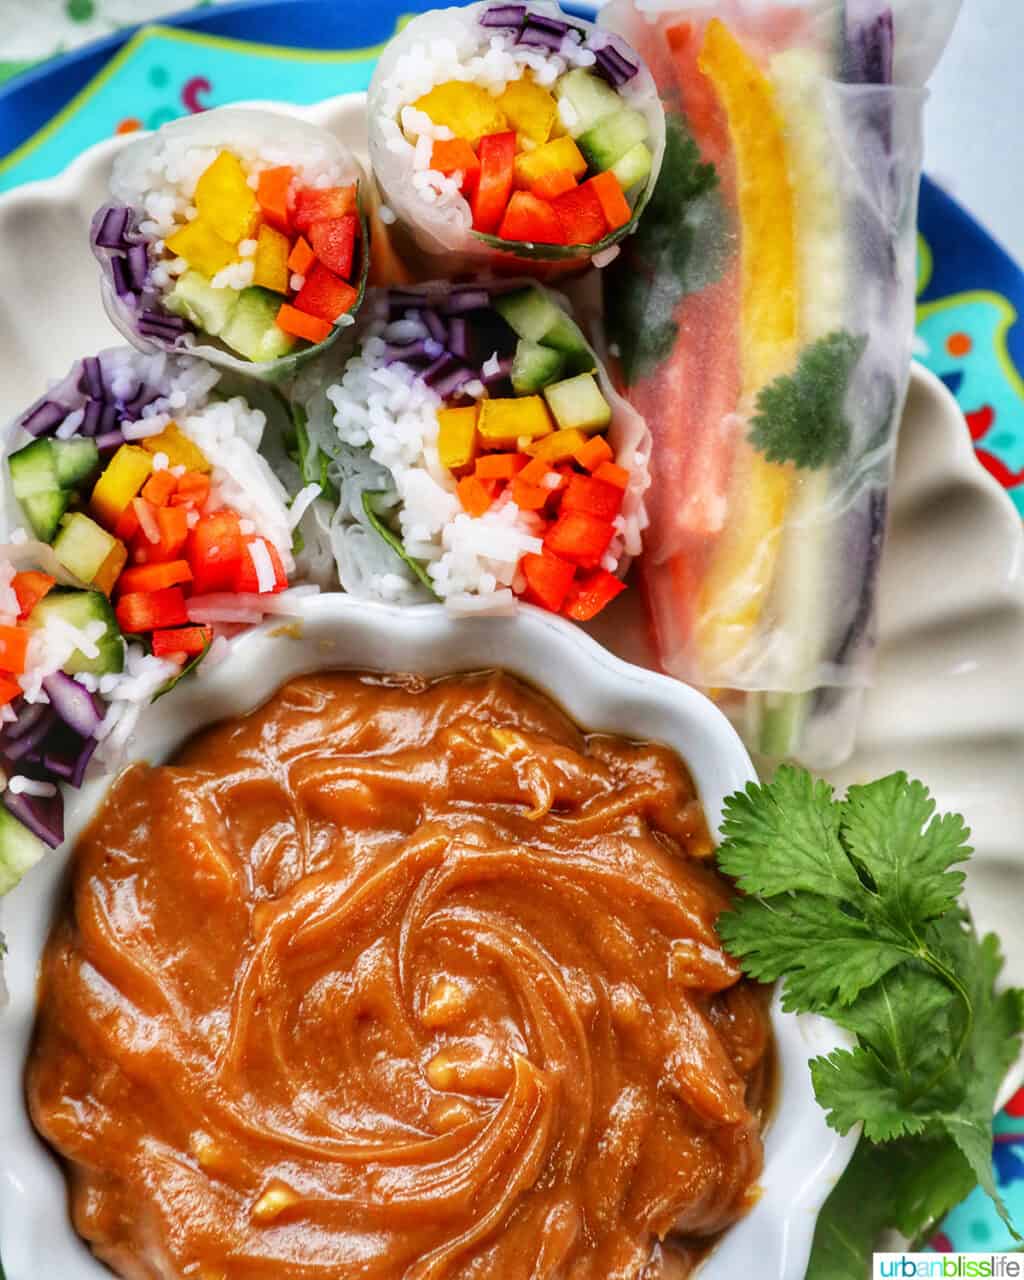 vegan summer rolls cut in half showing the vegetables and vermicelli noodles with a side of thai peanut sauce in a bowl.